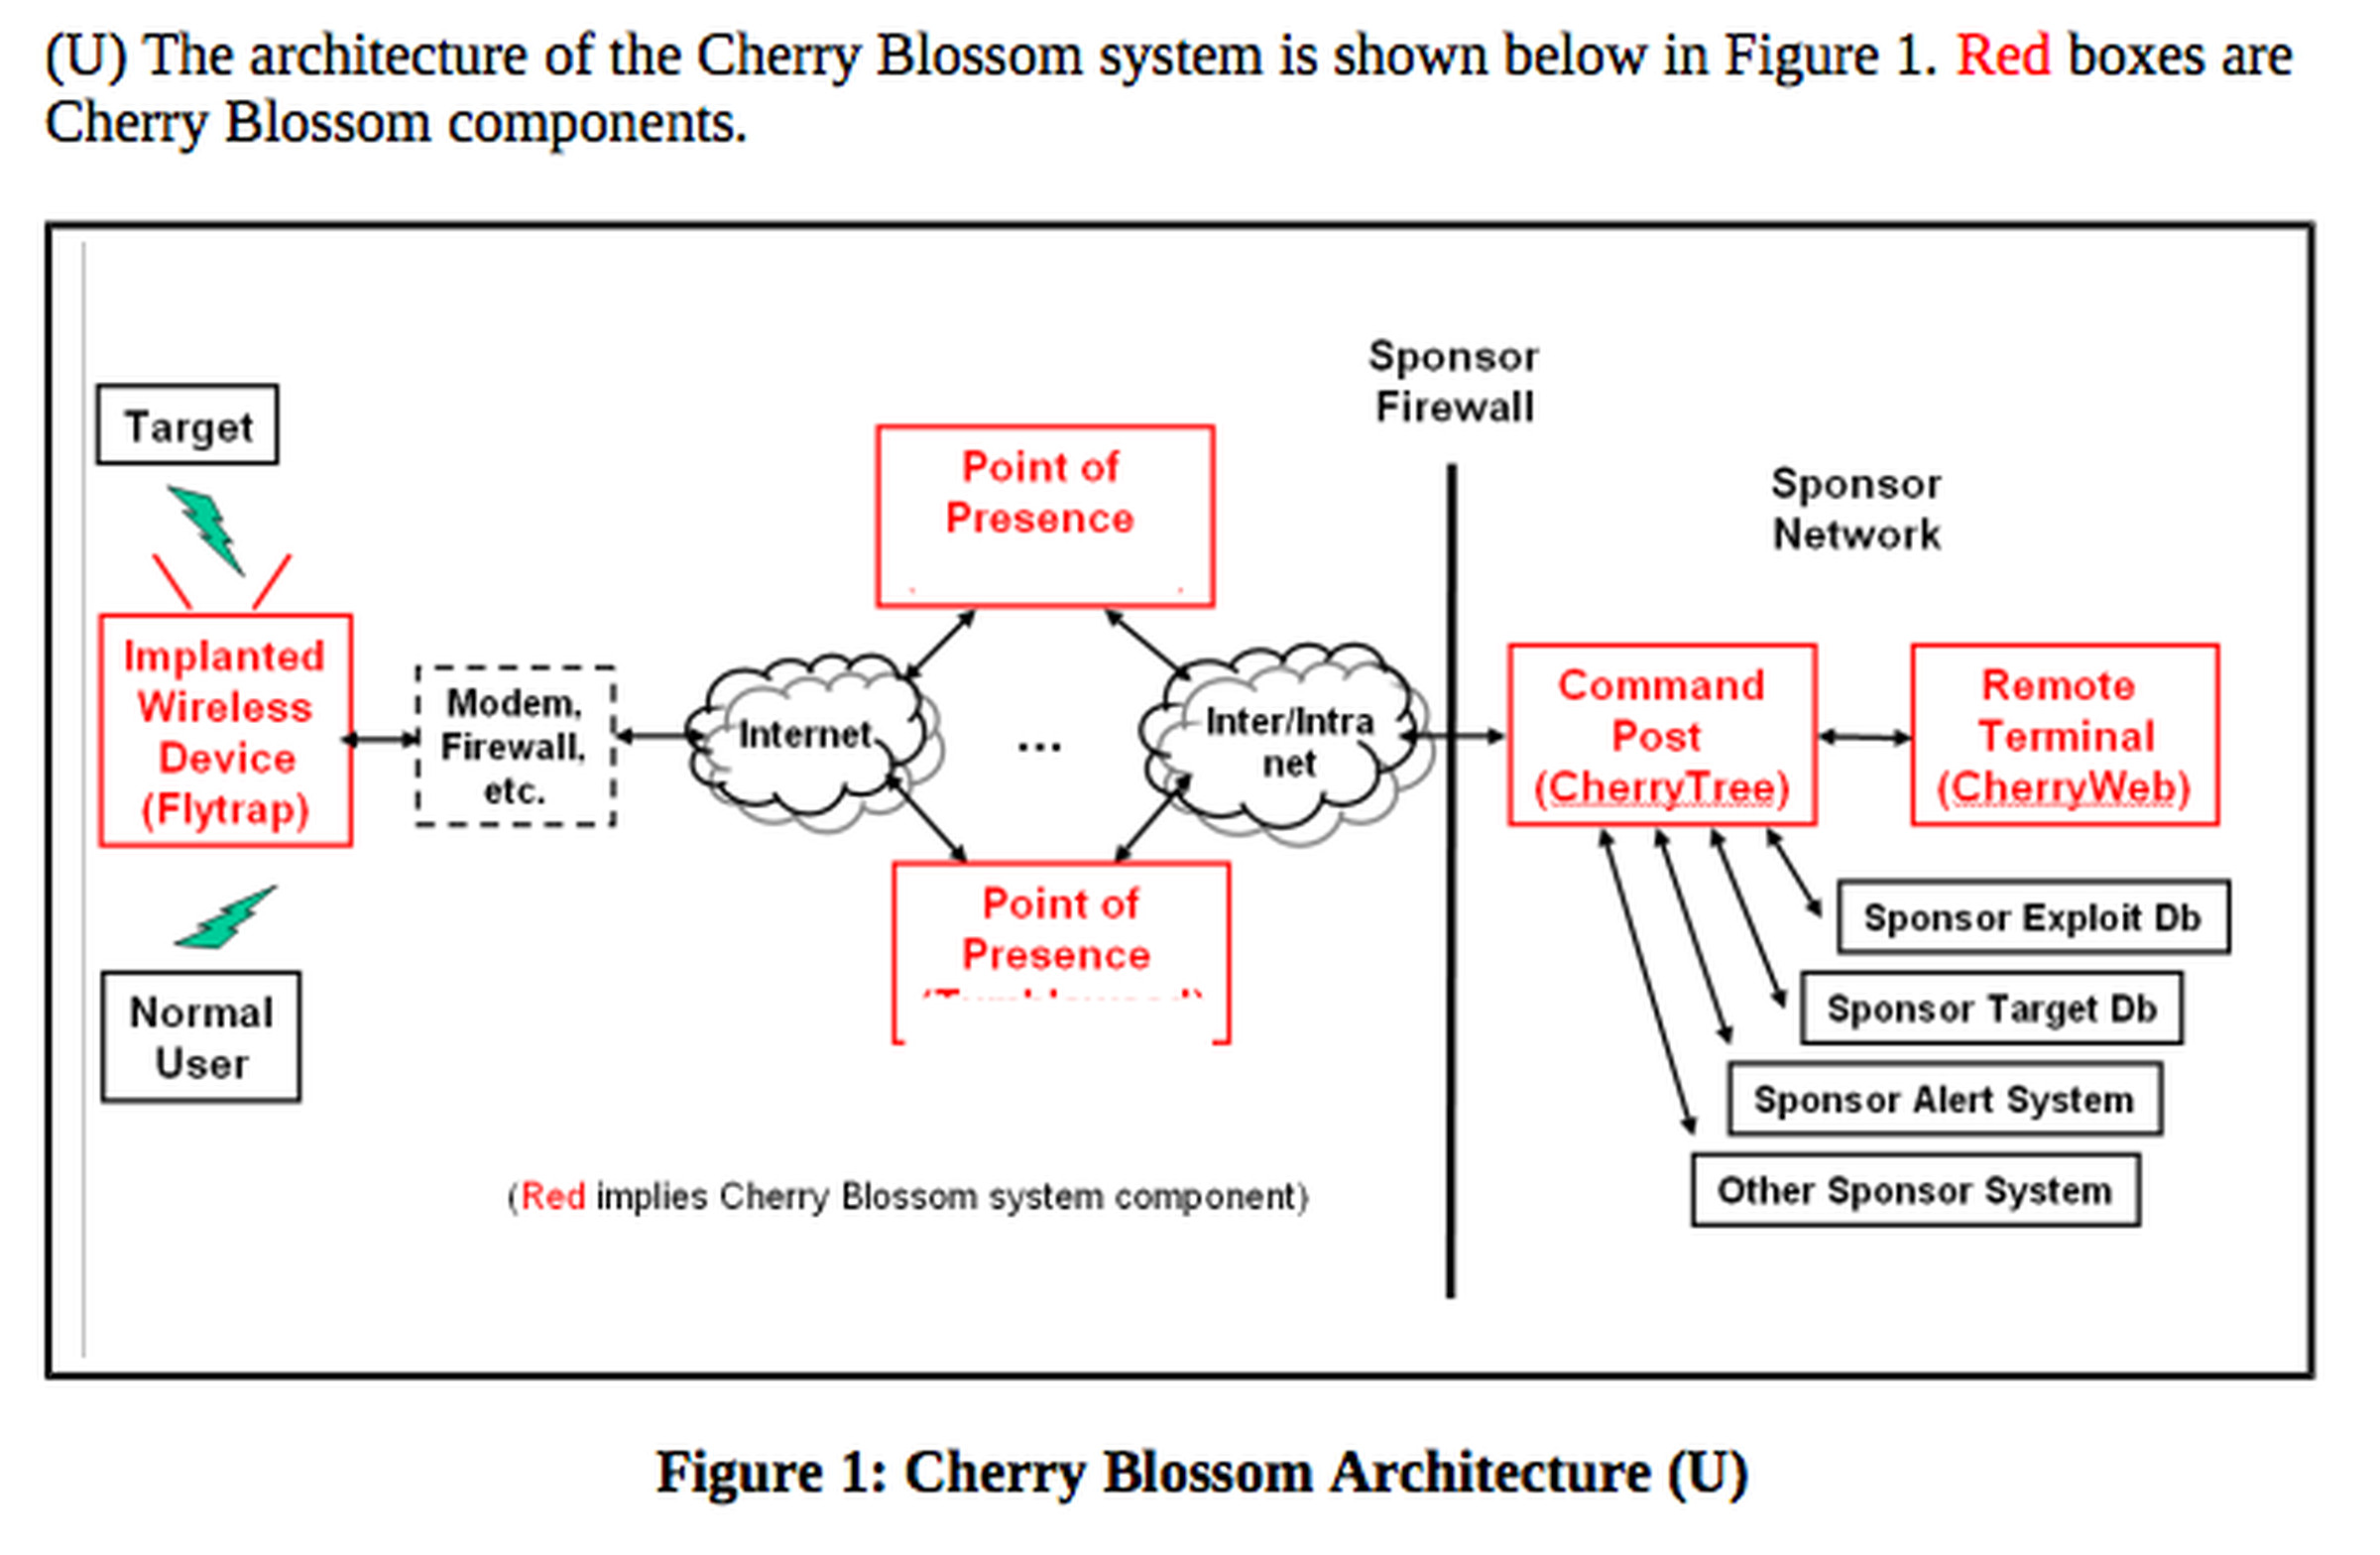 A diagram from the Cherry Blossom manual